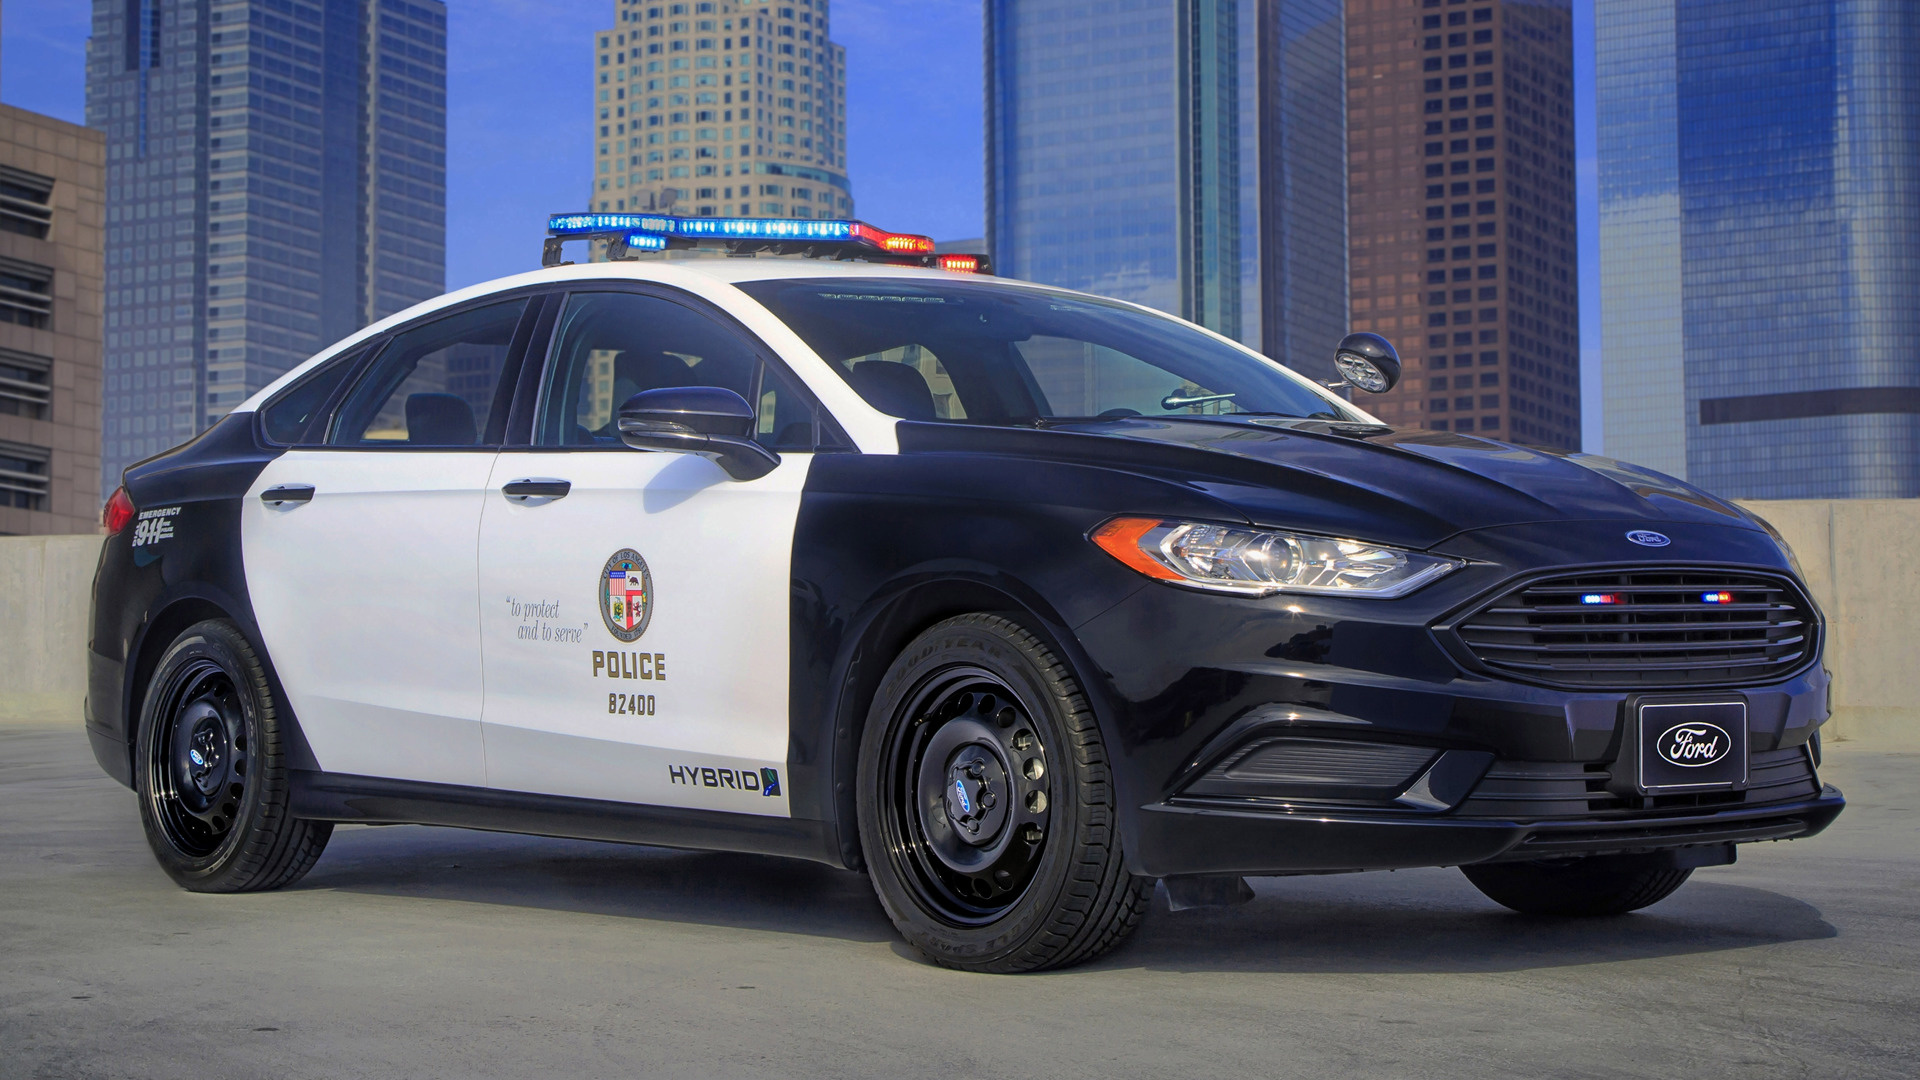 2018 Ford Police Responder Hybrid   Wallpapers and HD Images Car